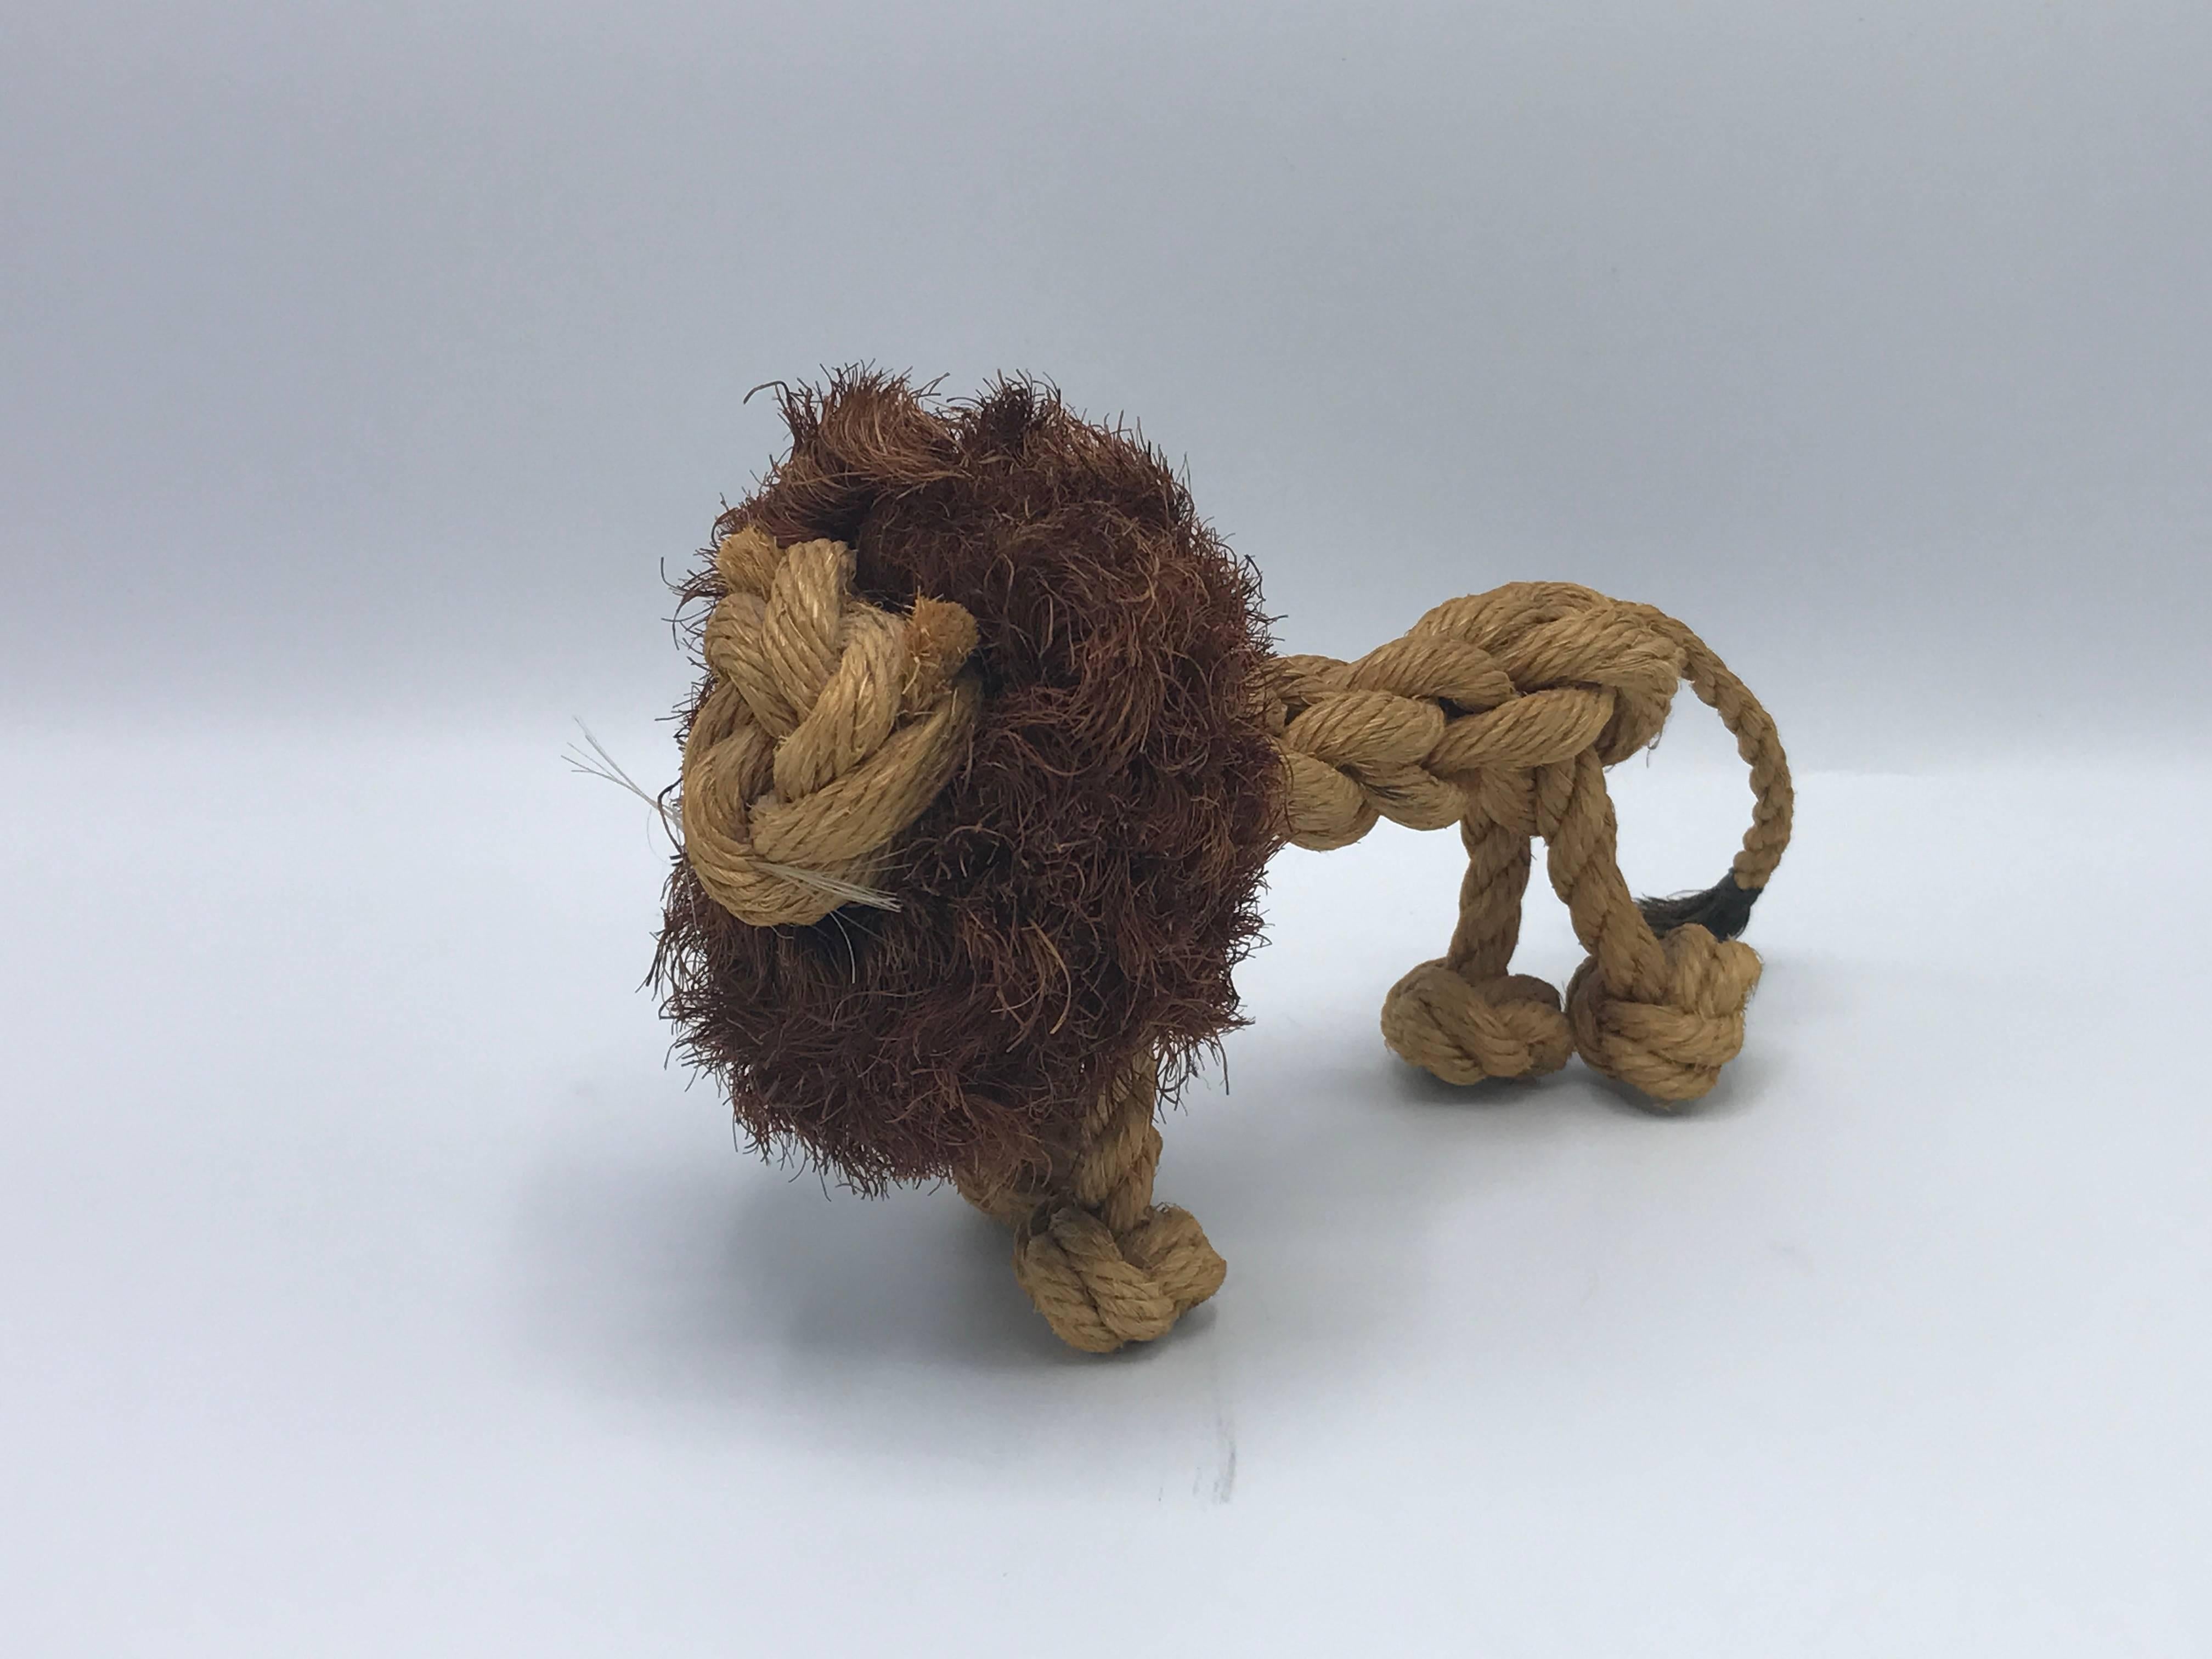 Offered is a rare and exquisite, 1950s Jørgen Bloch rope lion toy. The lion is formed of braided natural rope and was designed in collaboration between Jørgen Bloch and Kay Bojesen in the late 1950s.